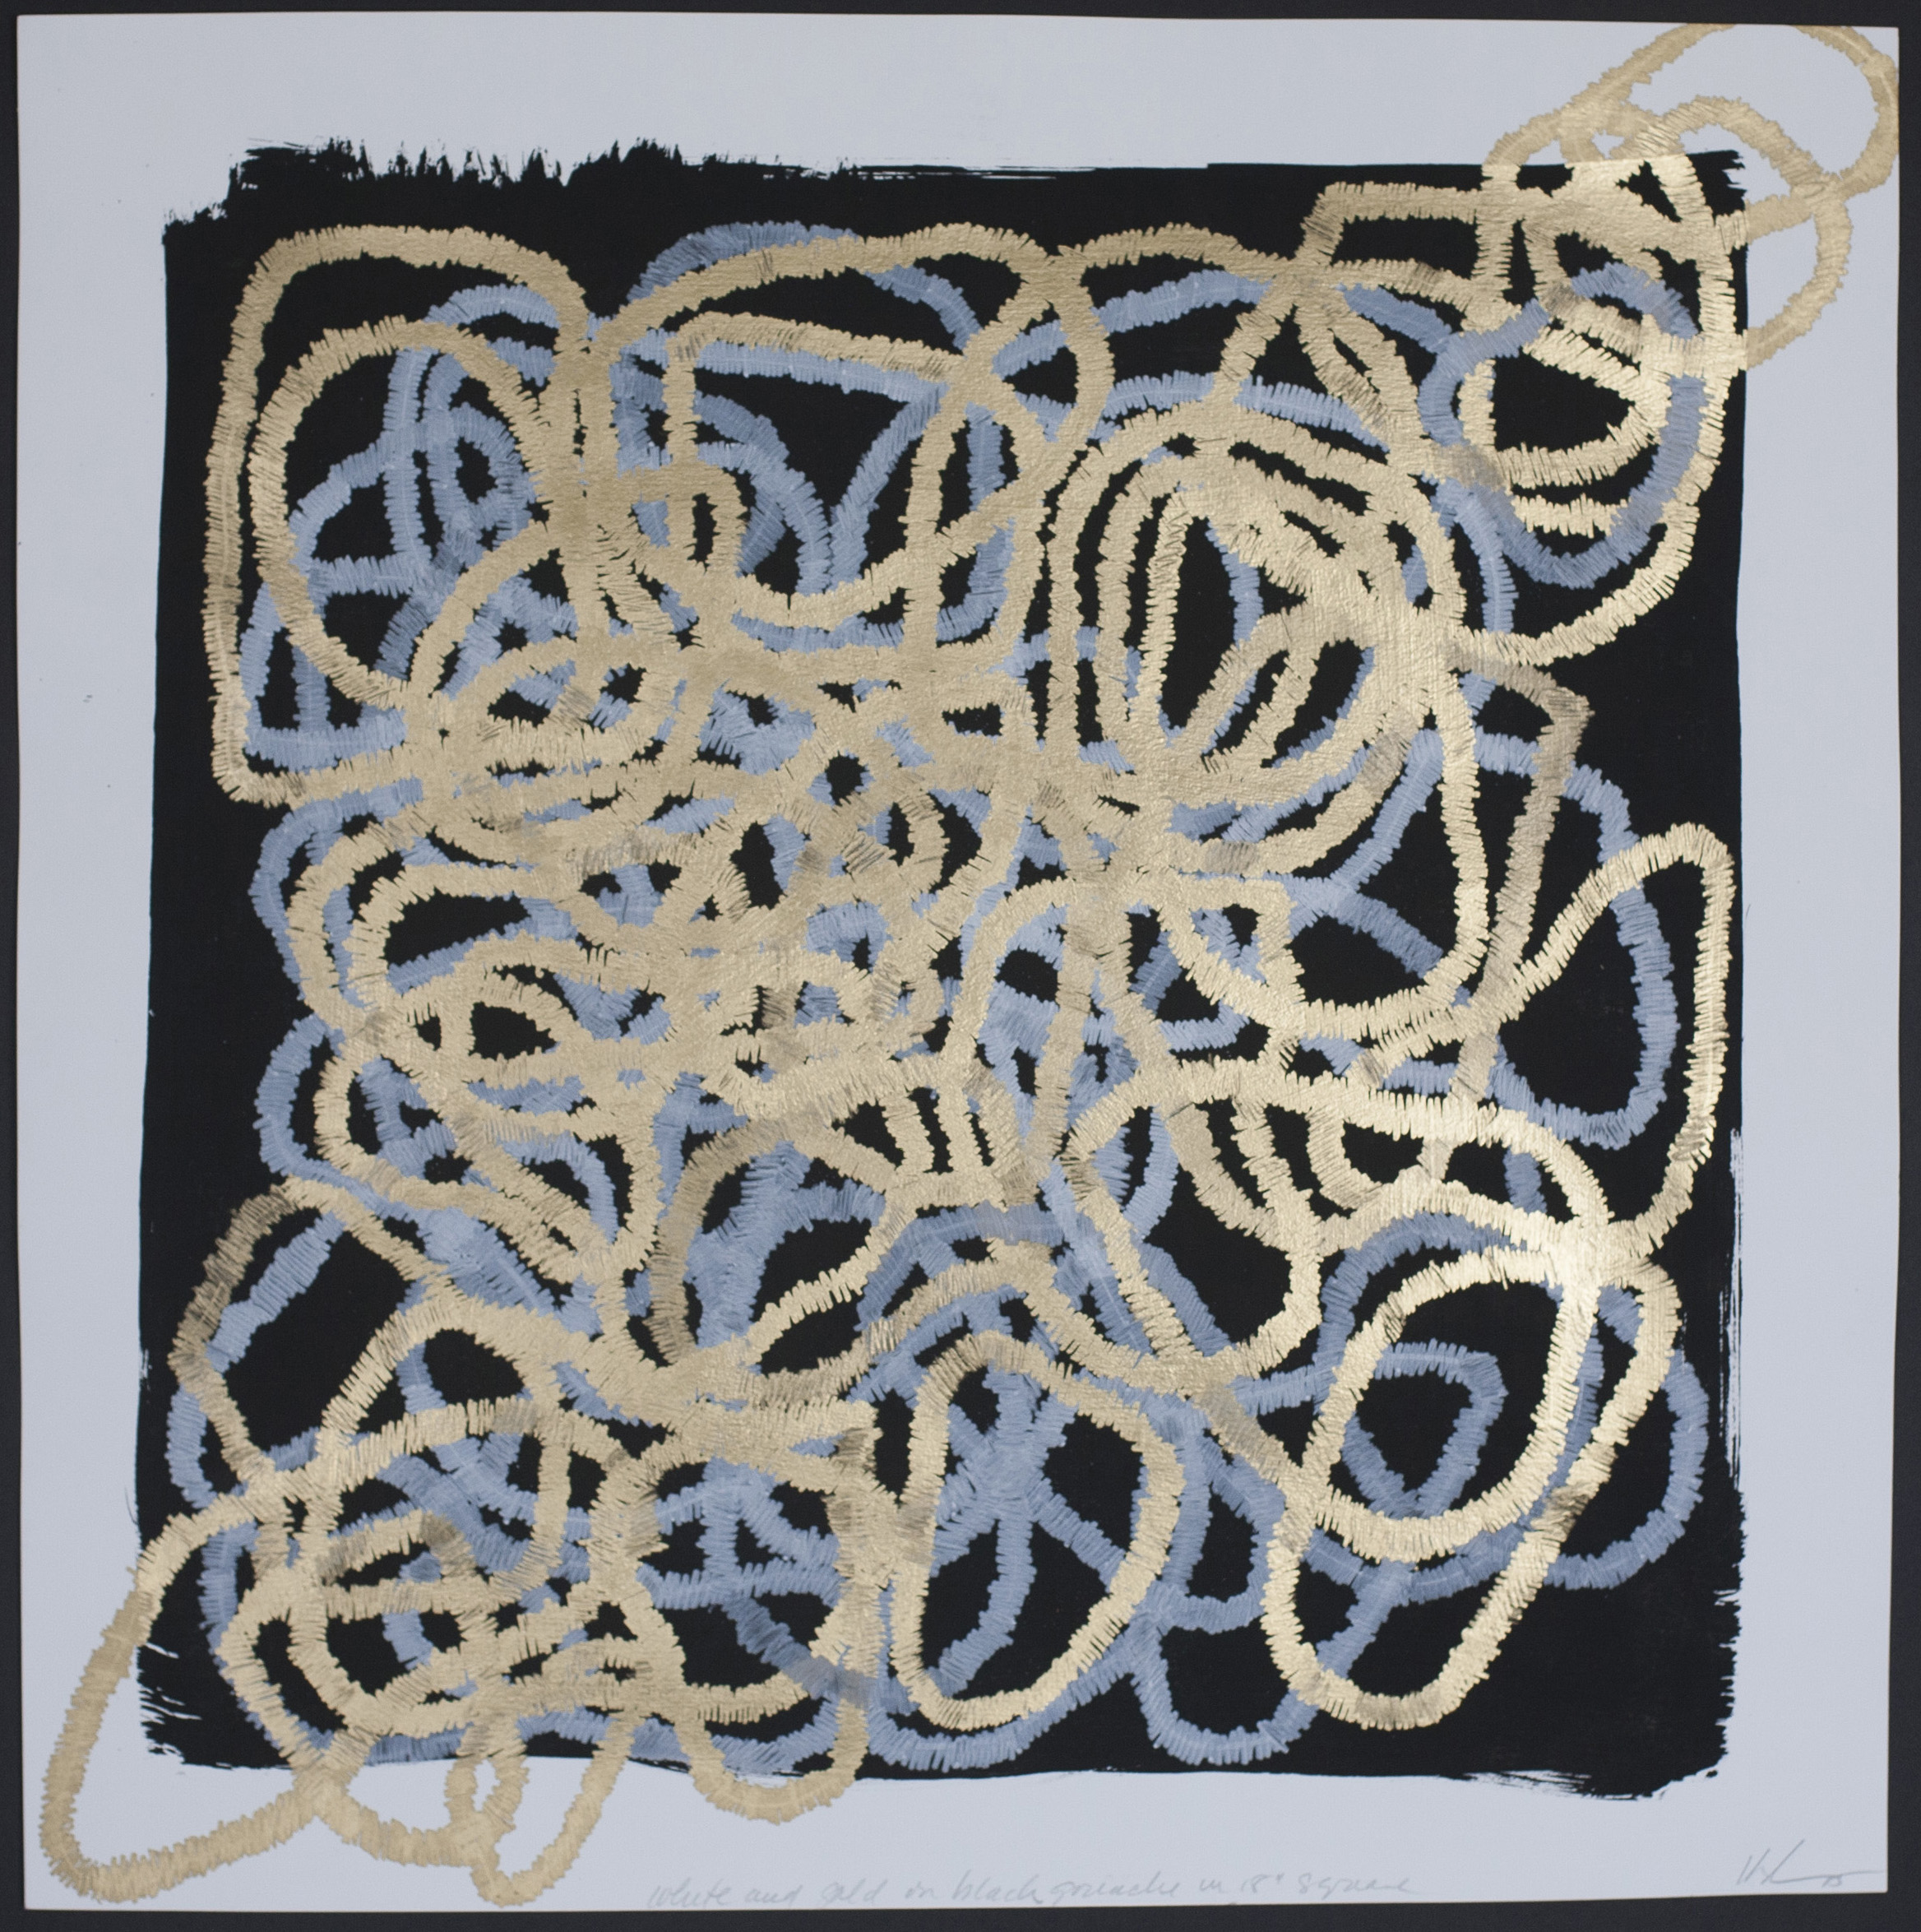 Lyn Horton, White and gold on black gouache in 18 in square, 2015.